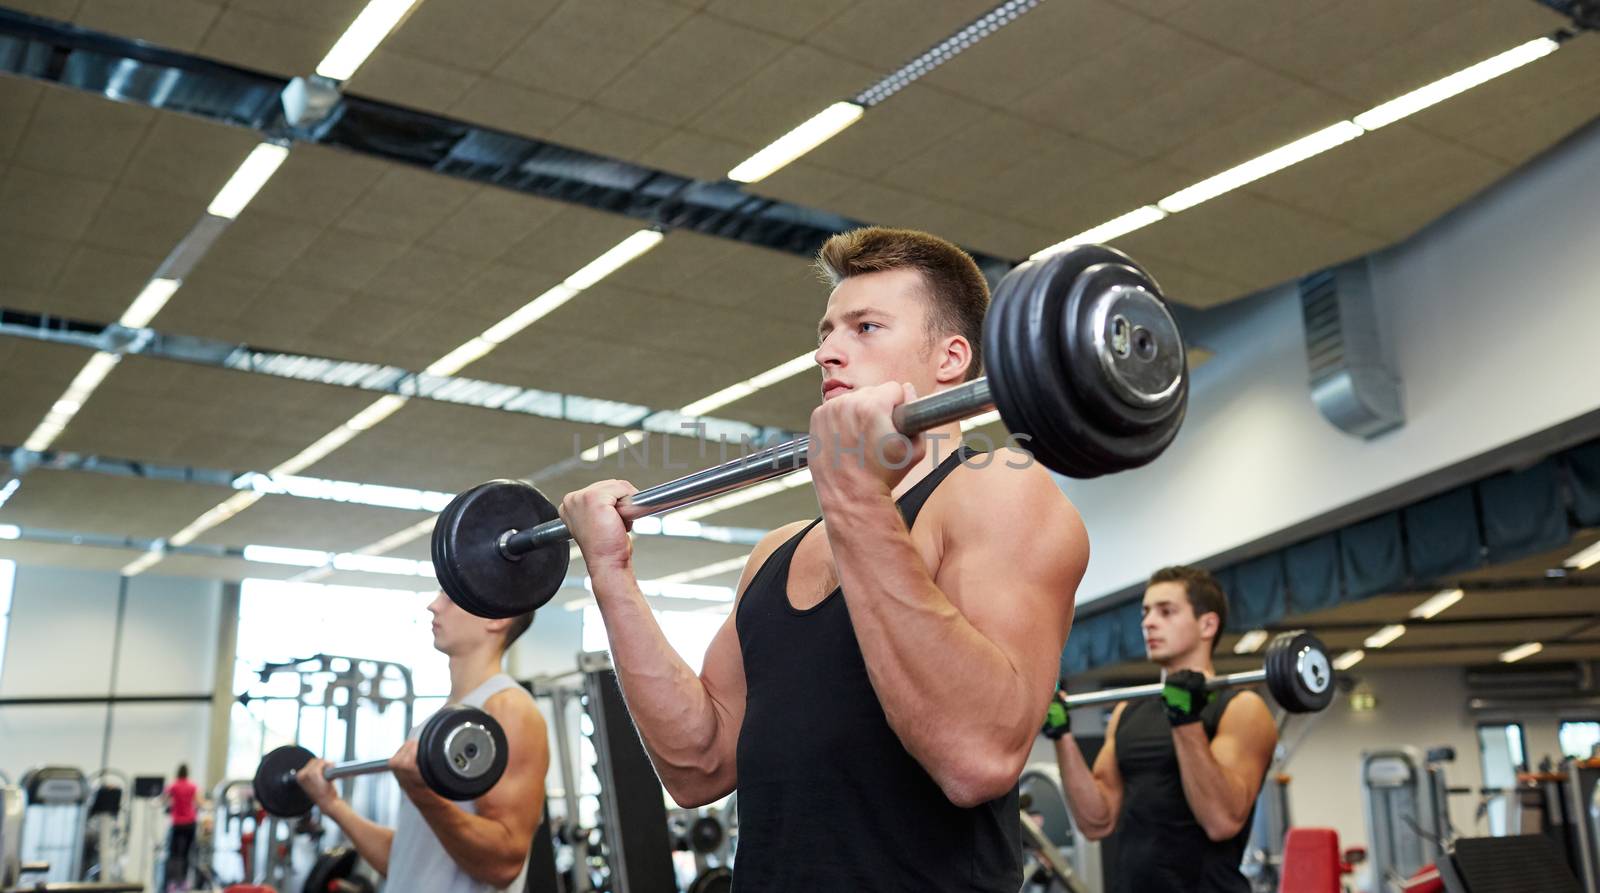 sport, bodybuilding, lifestyle and people concept - group of men with barbell flexing muscles in gym